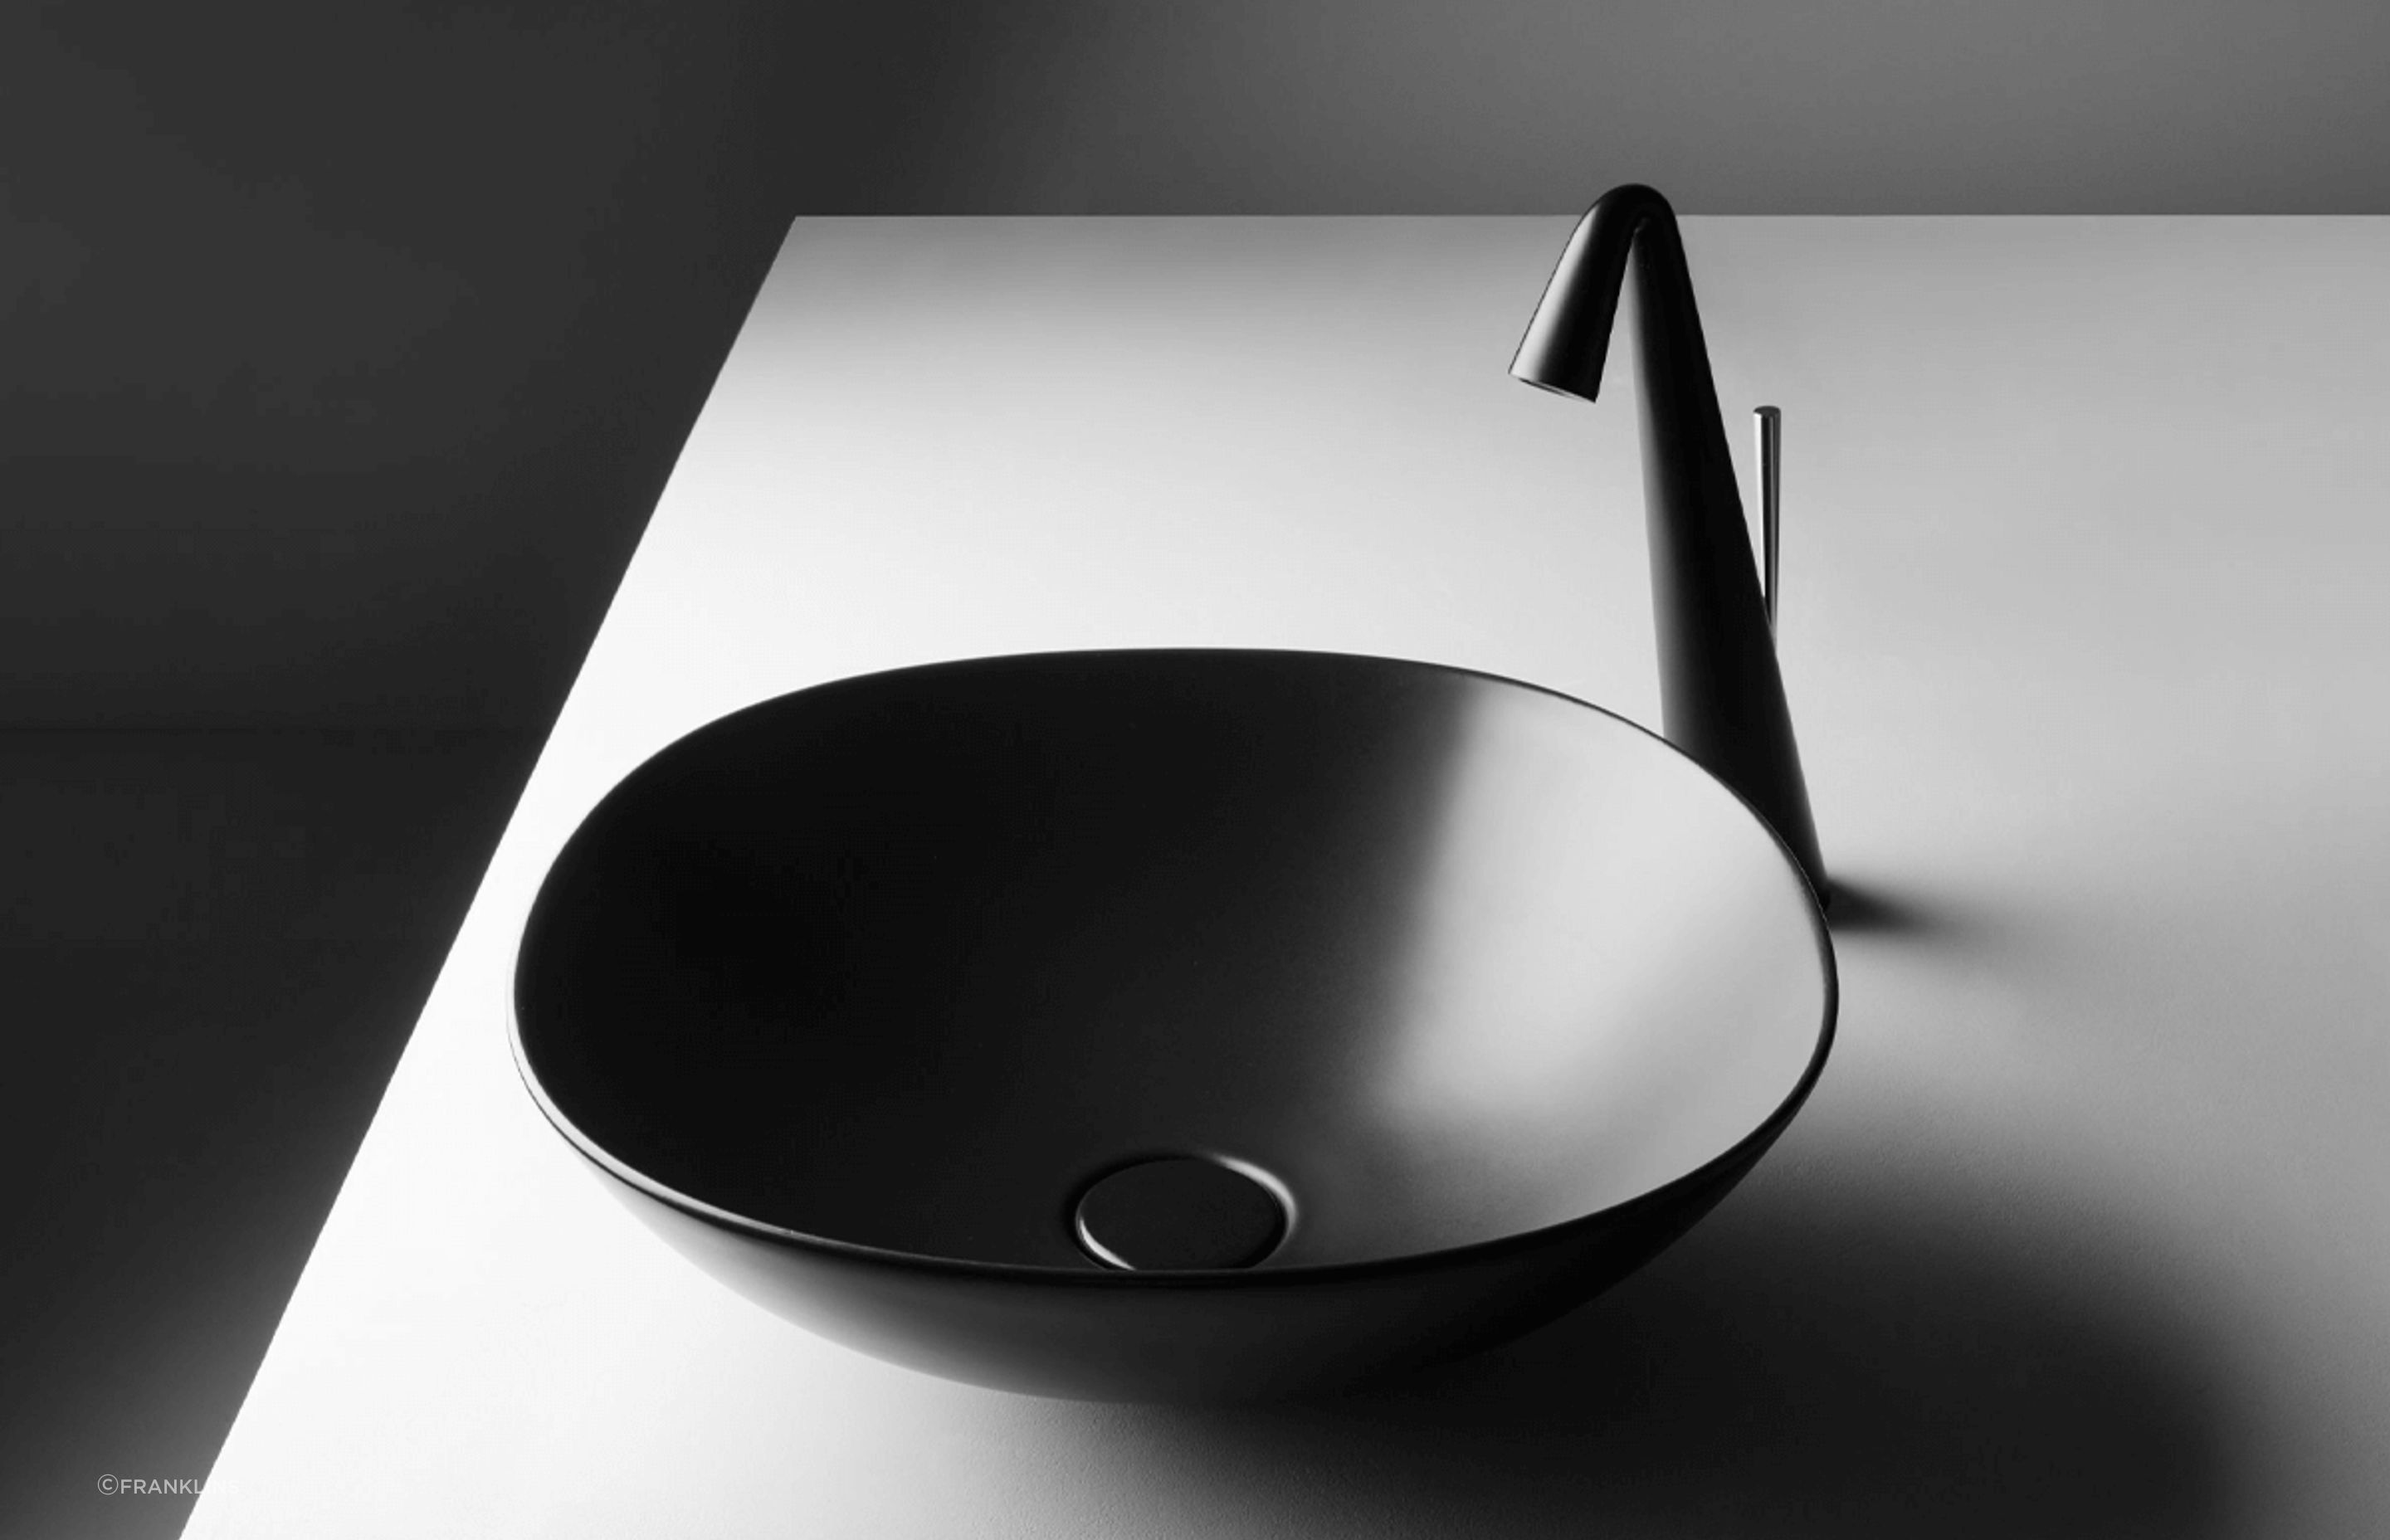 A design at peace with itself with the Valdama Pod Countertop Basin.